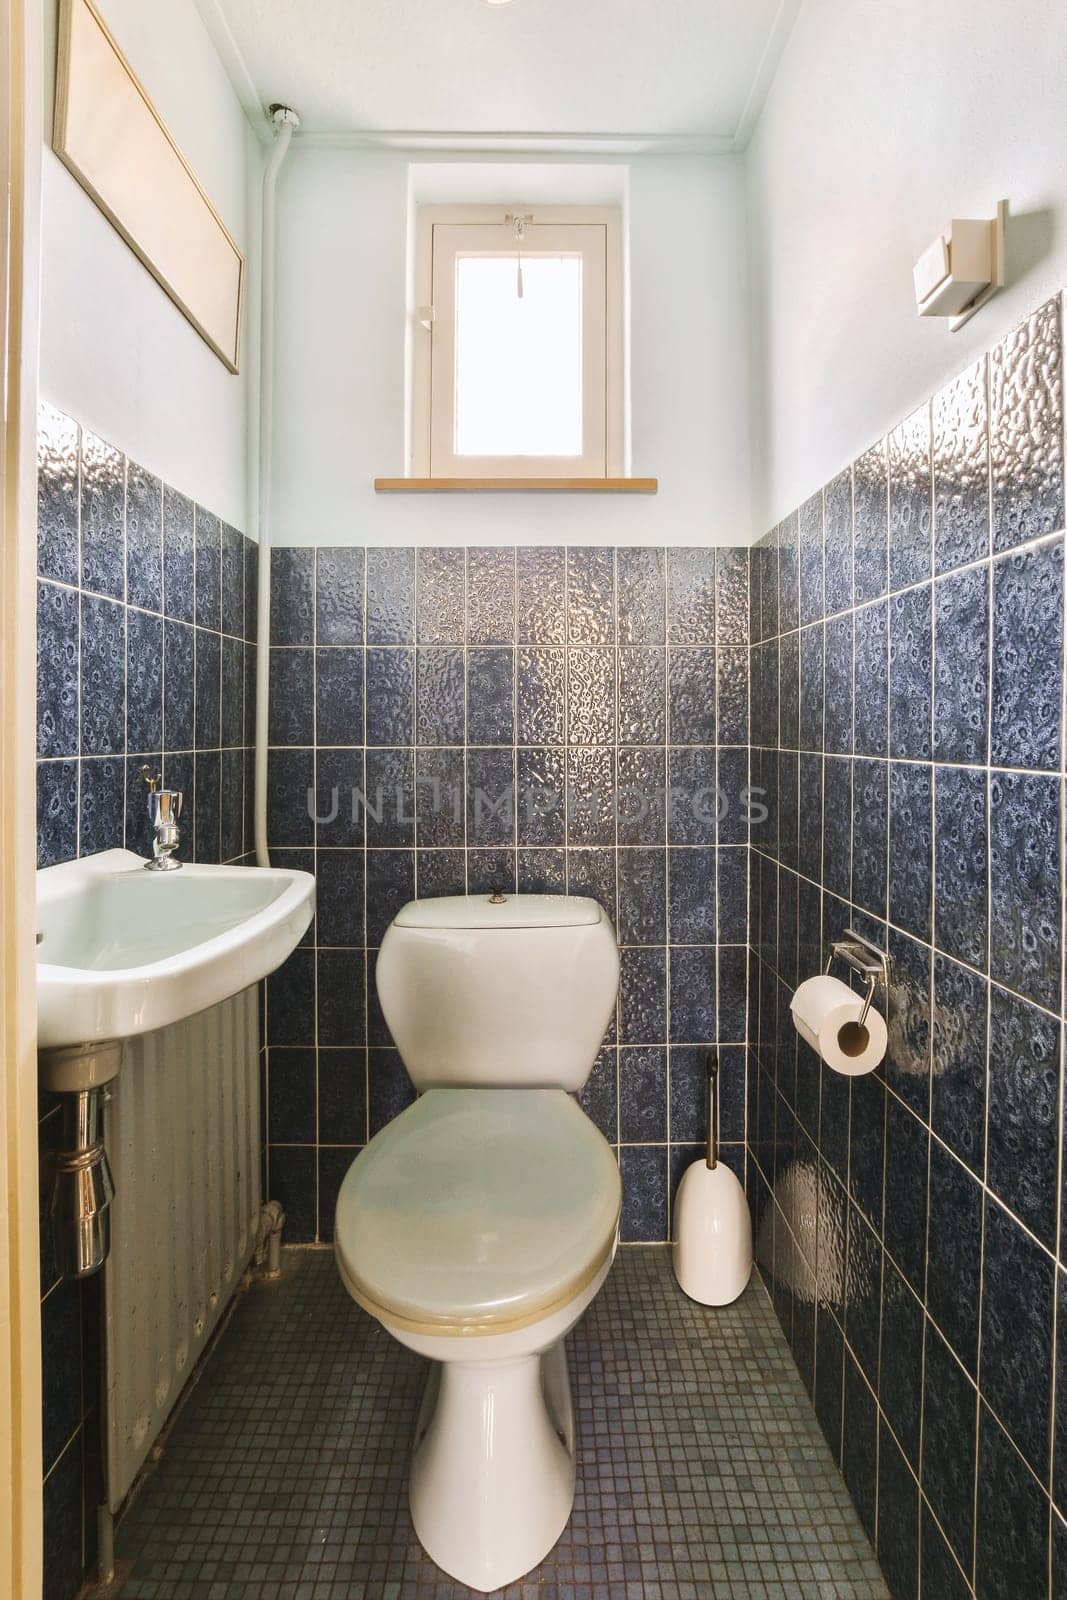 a small bathroom with blue tiles on the walls and white fixtures in the toilet bowl is next to the sink